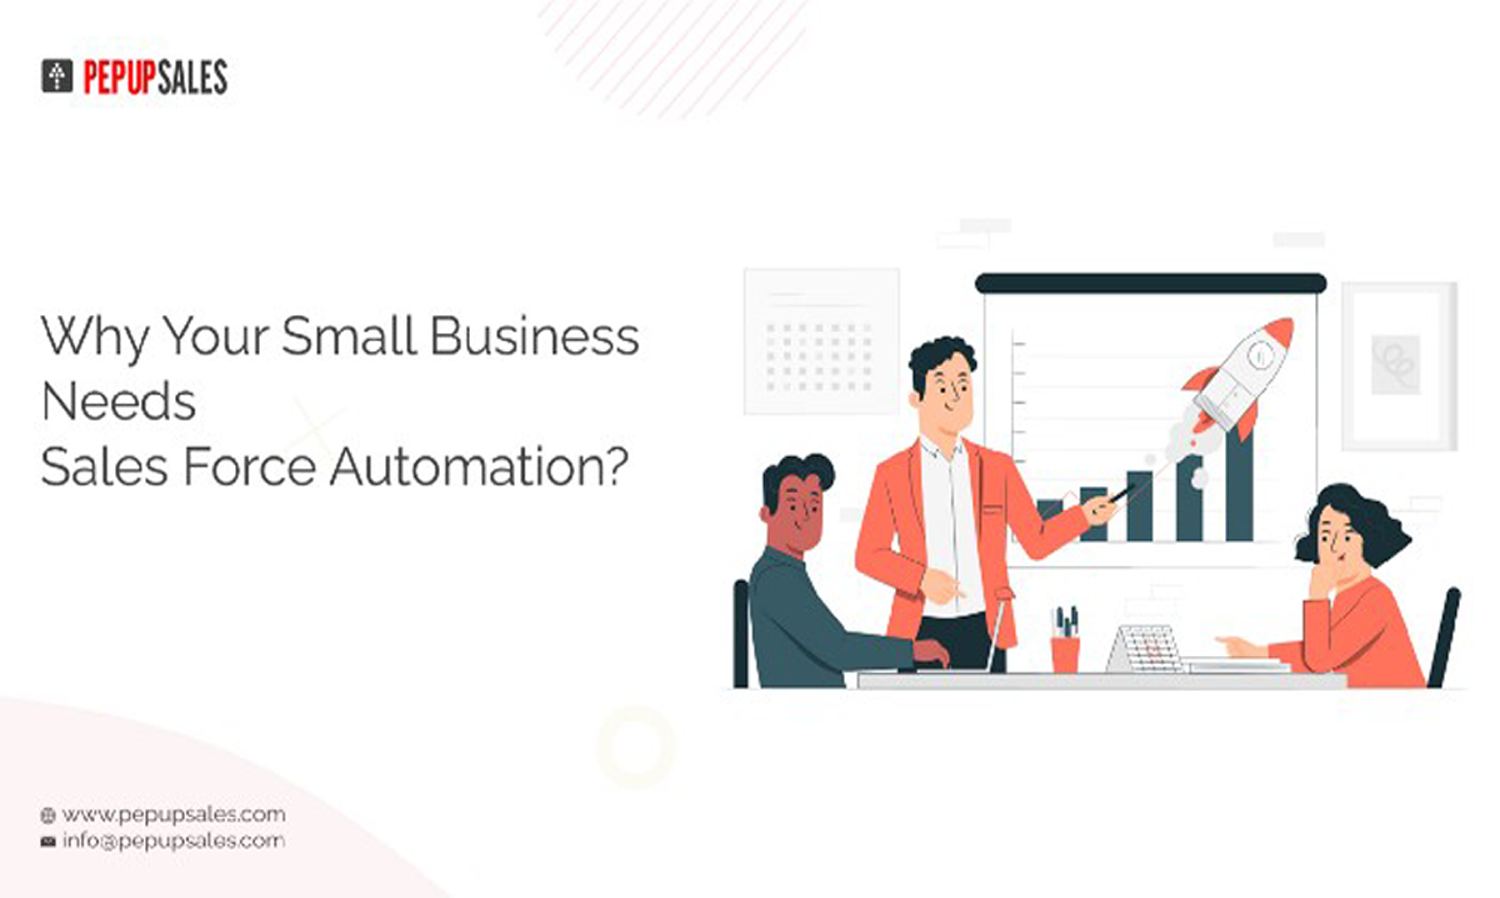 Small Business Needs Sales Force Automation